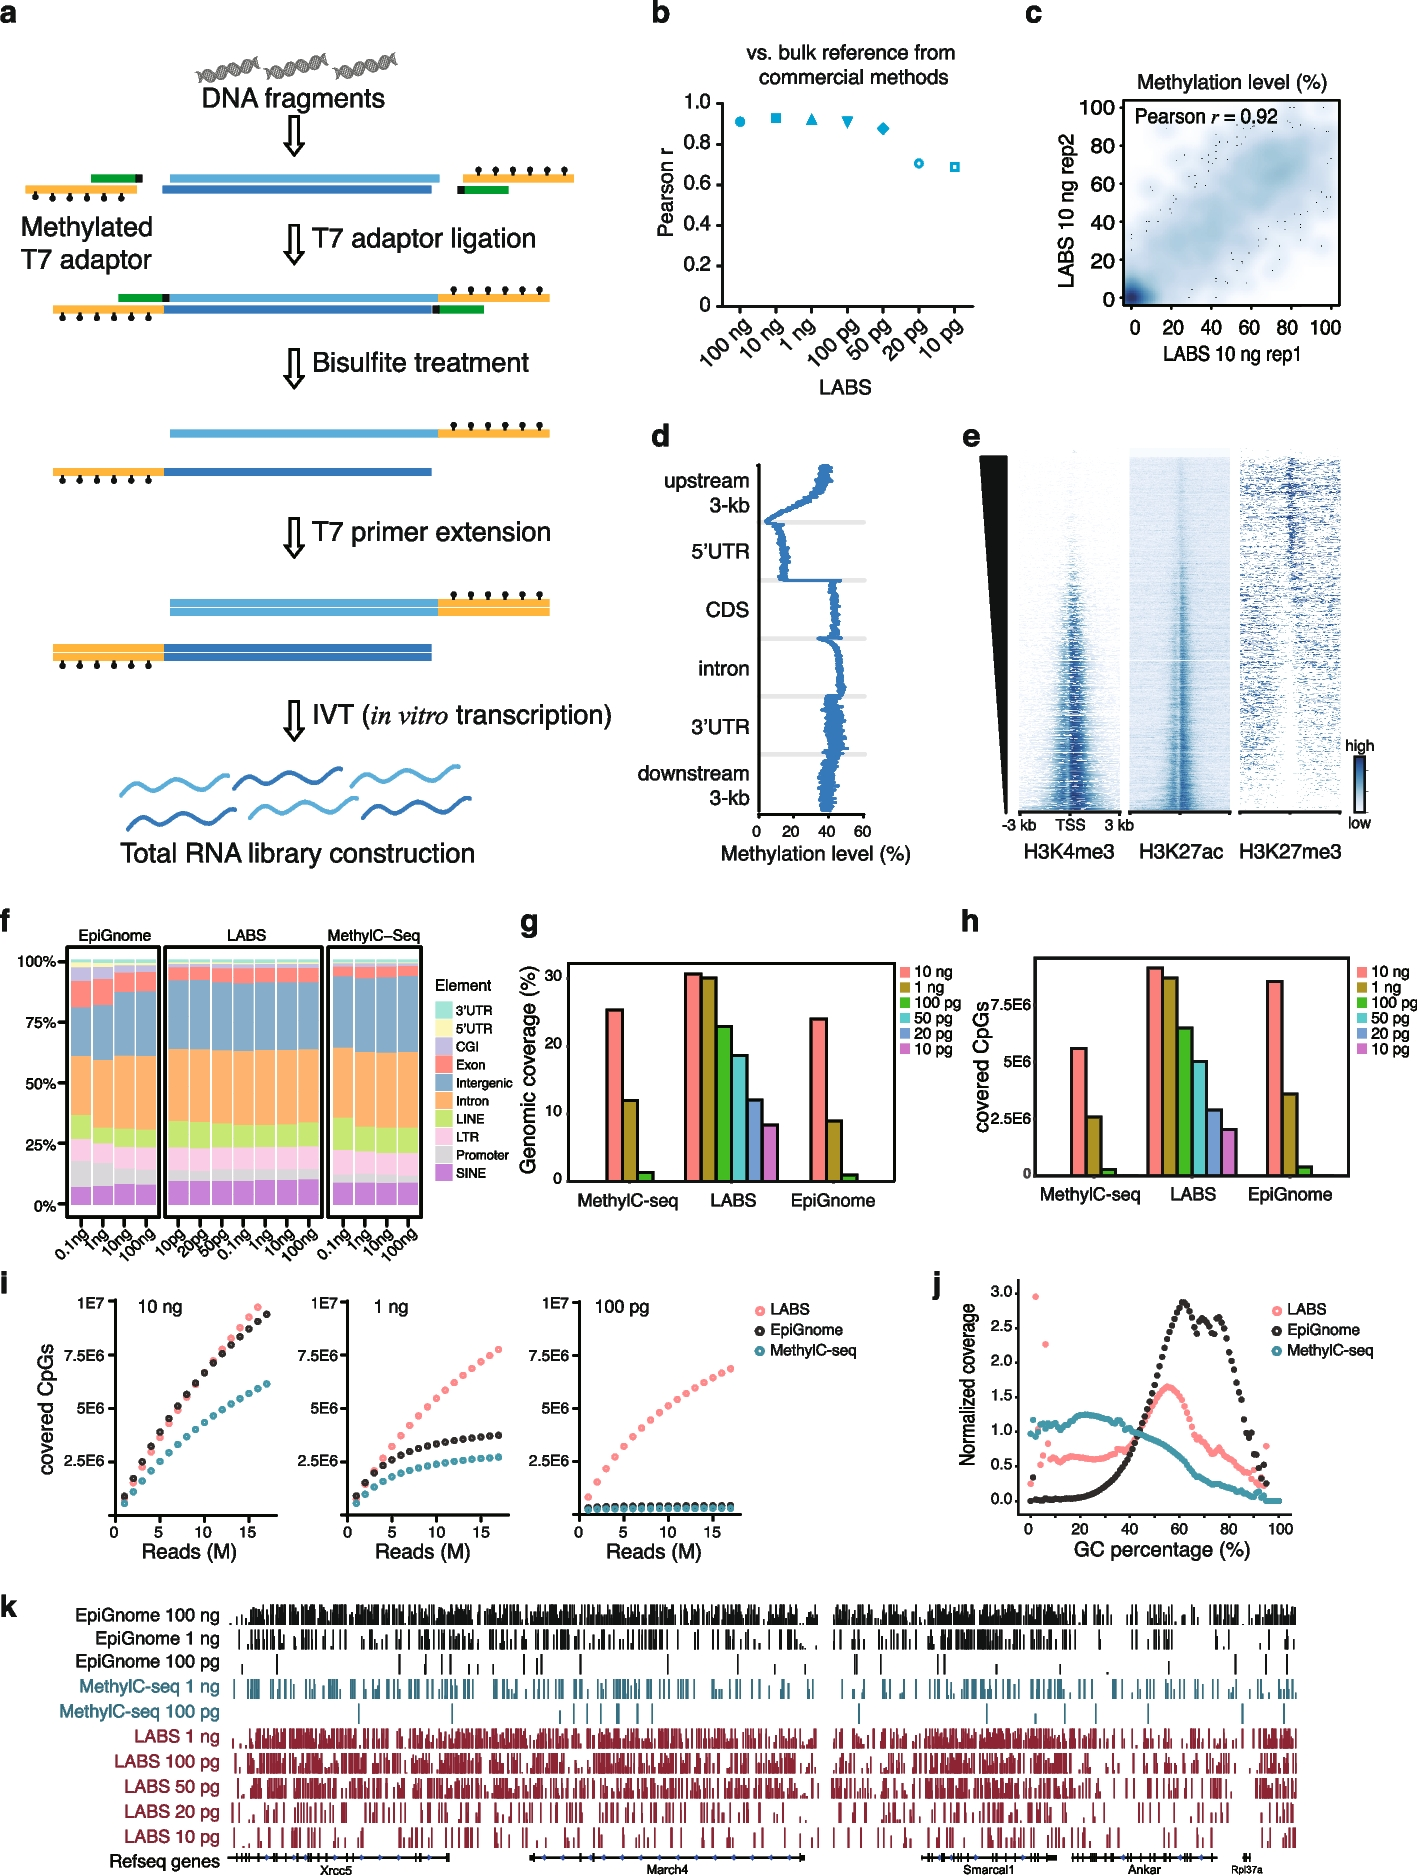 LABS: linear amplification-based bisulfite sequencing for ultrasensitive cancer detection from cell-free DNA